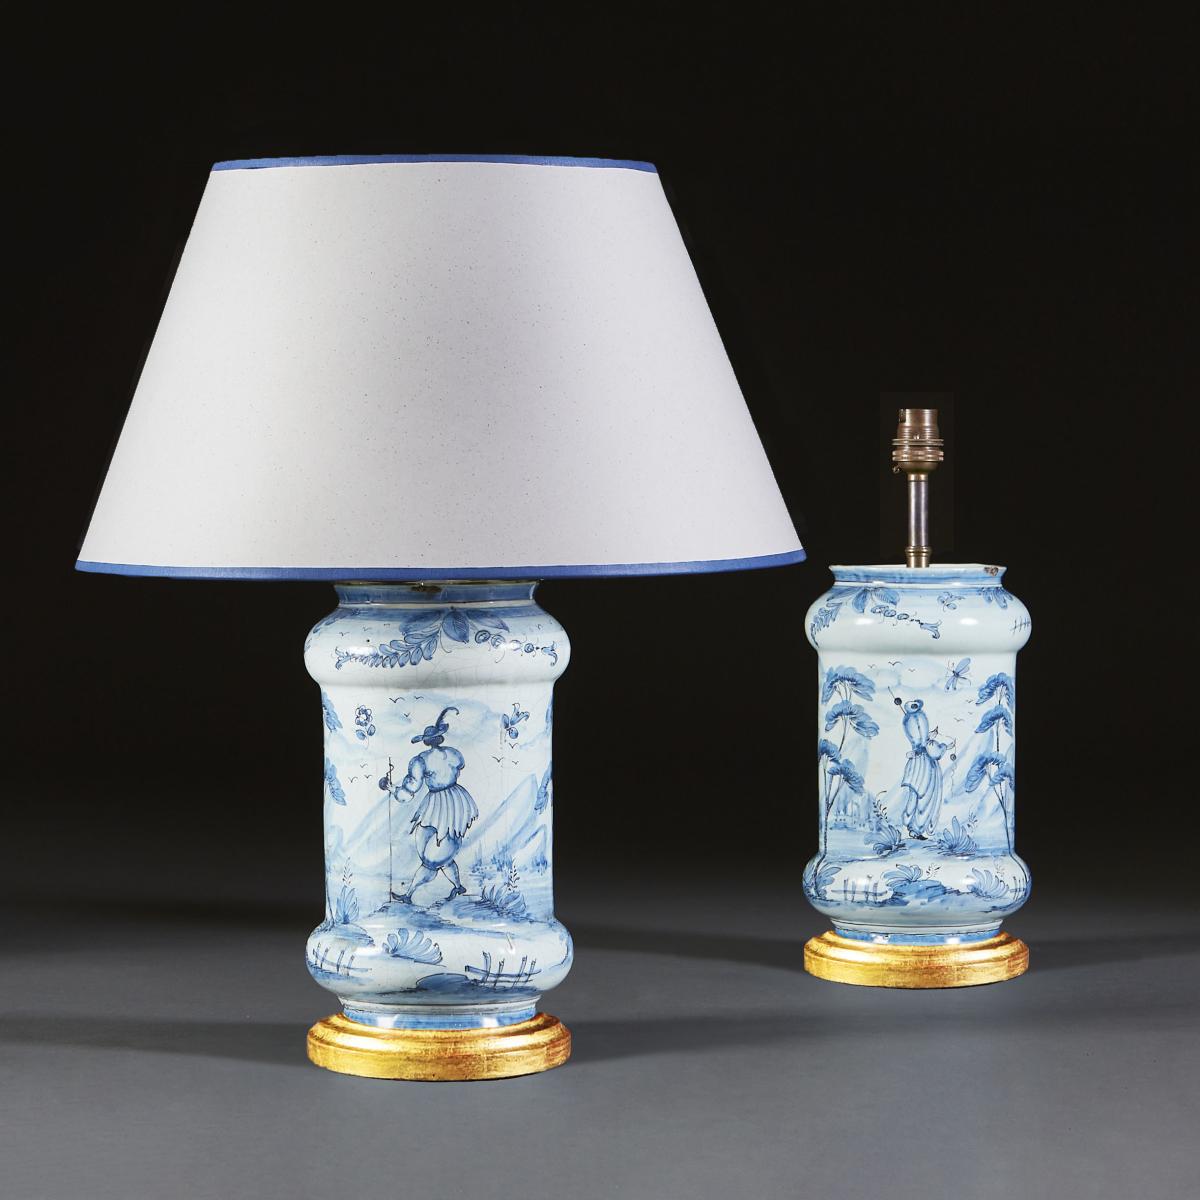 A Pair of Blue and White Italian Tin Glaze Vases as Lamps